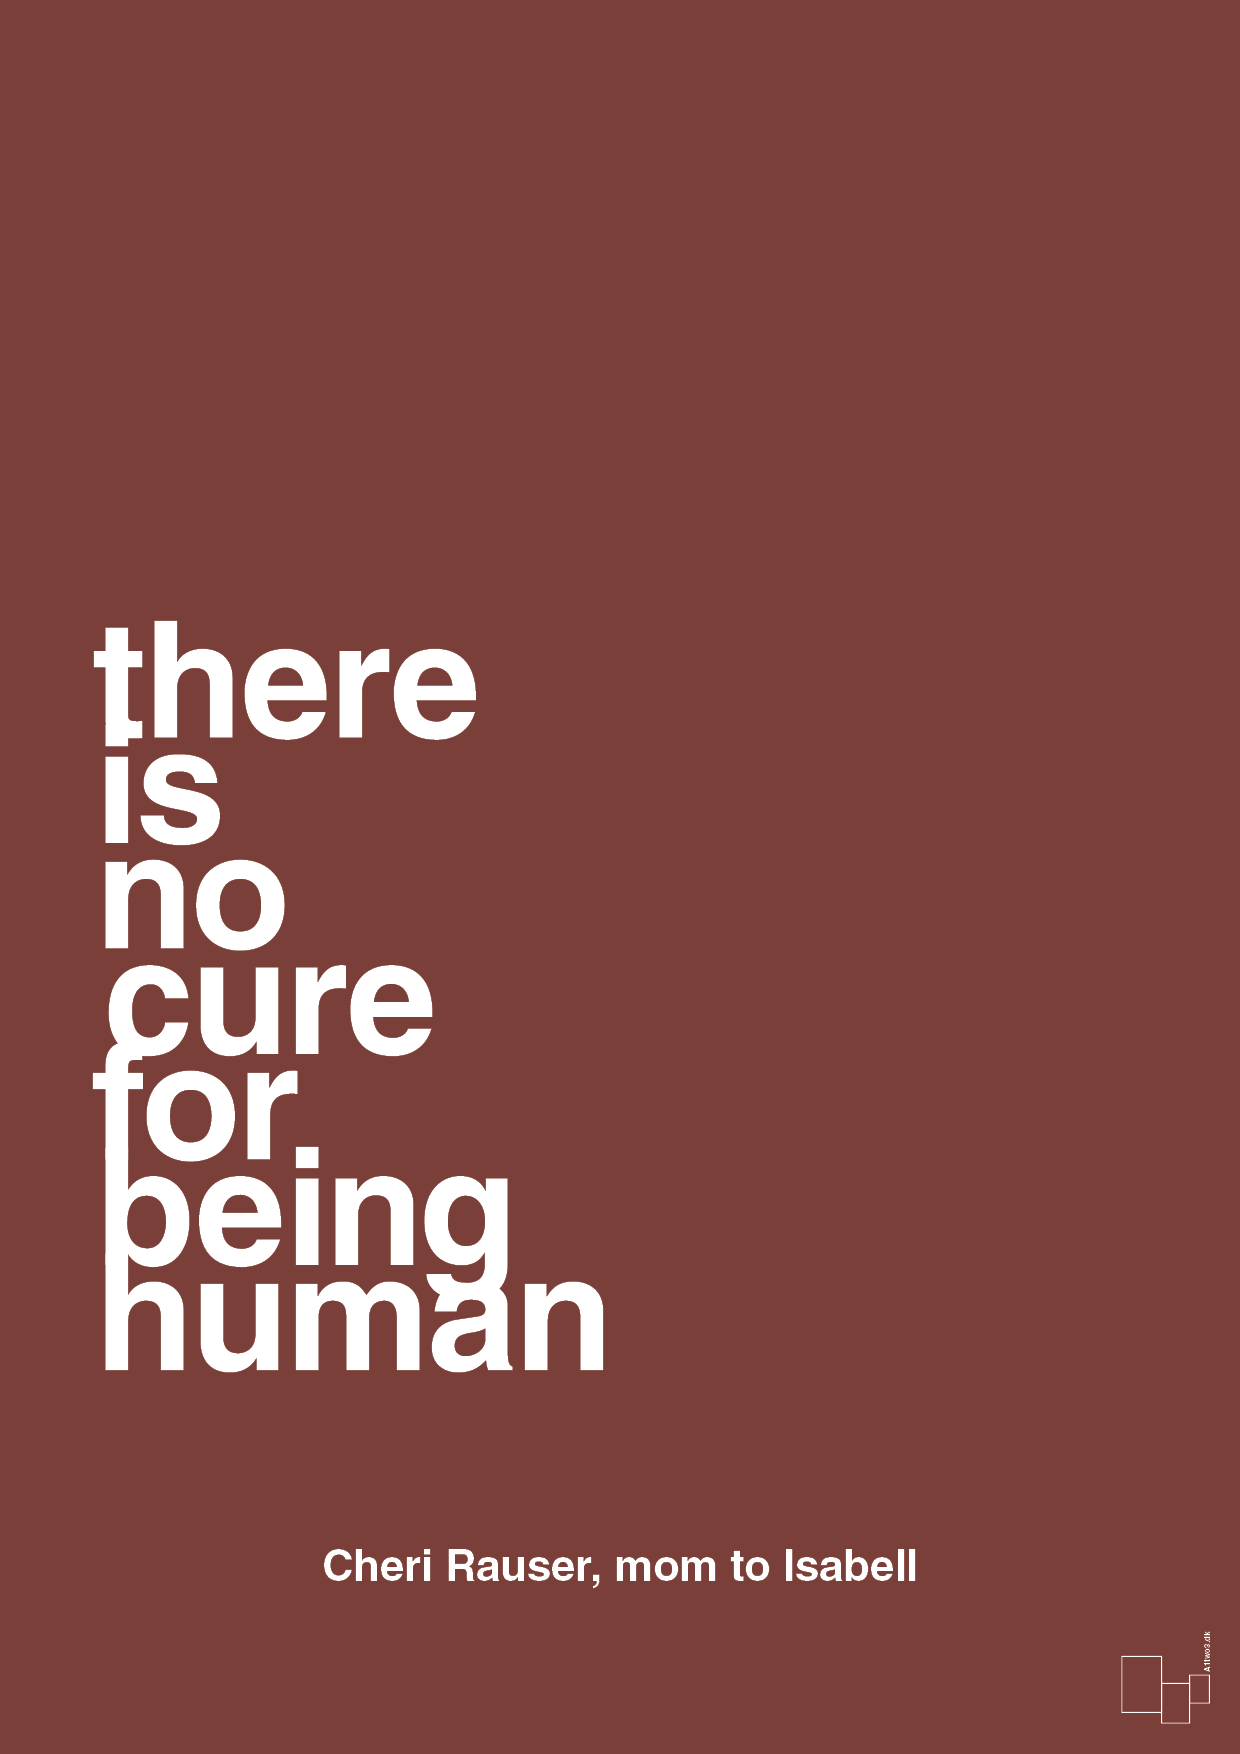 there is no cure for being human - Plakat med Samfund i Red Pepper